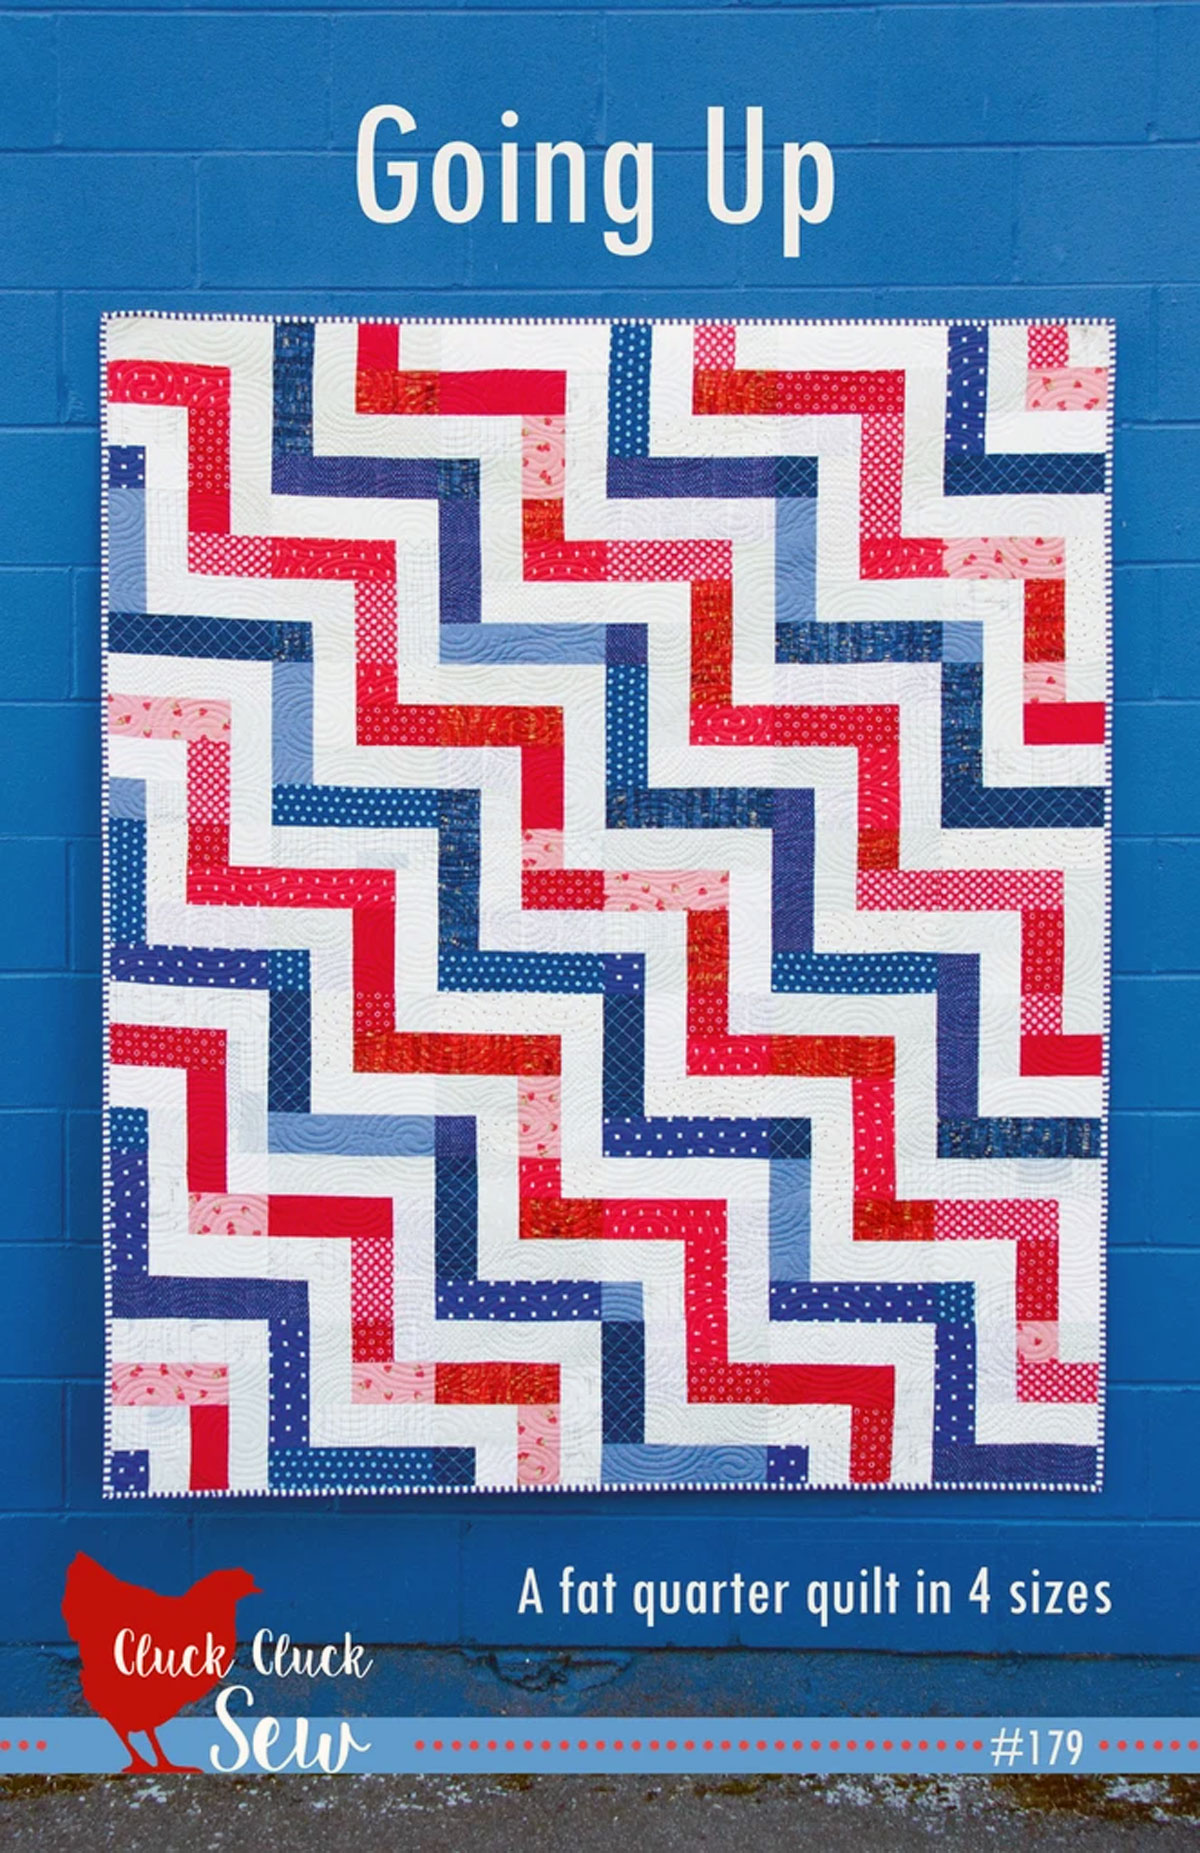 Going-Up-quilt-sewing-pattern-Cluck-Cluck-Sew-front